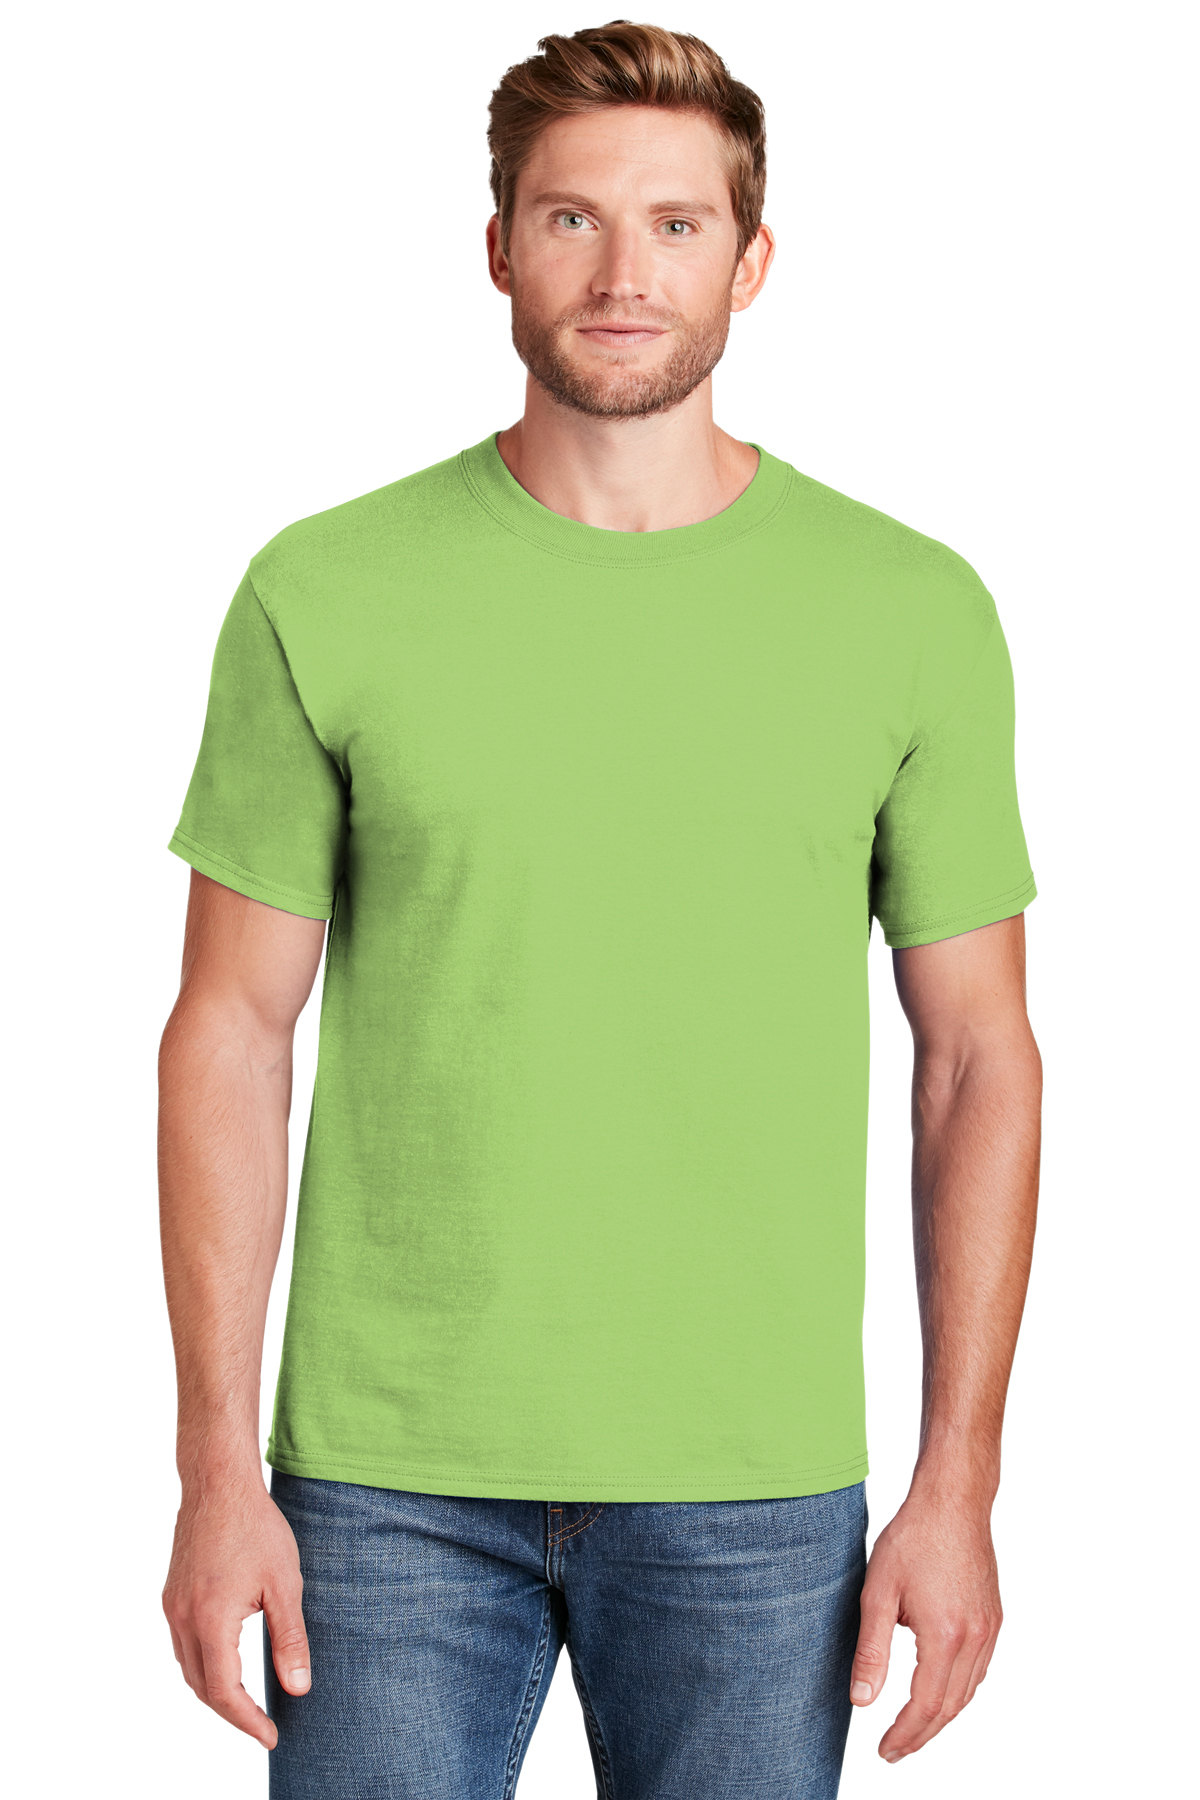 Hanes Beefy-T - 100% Cotton T-Shirt | Product | Company Casuals